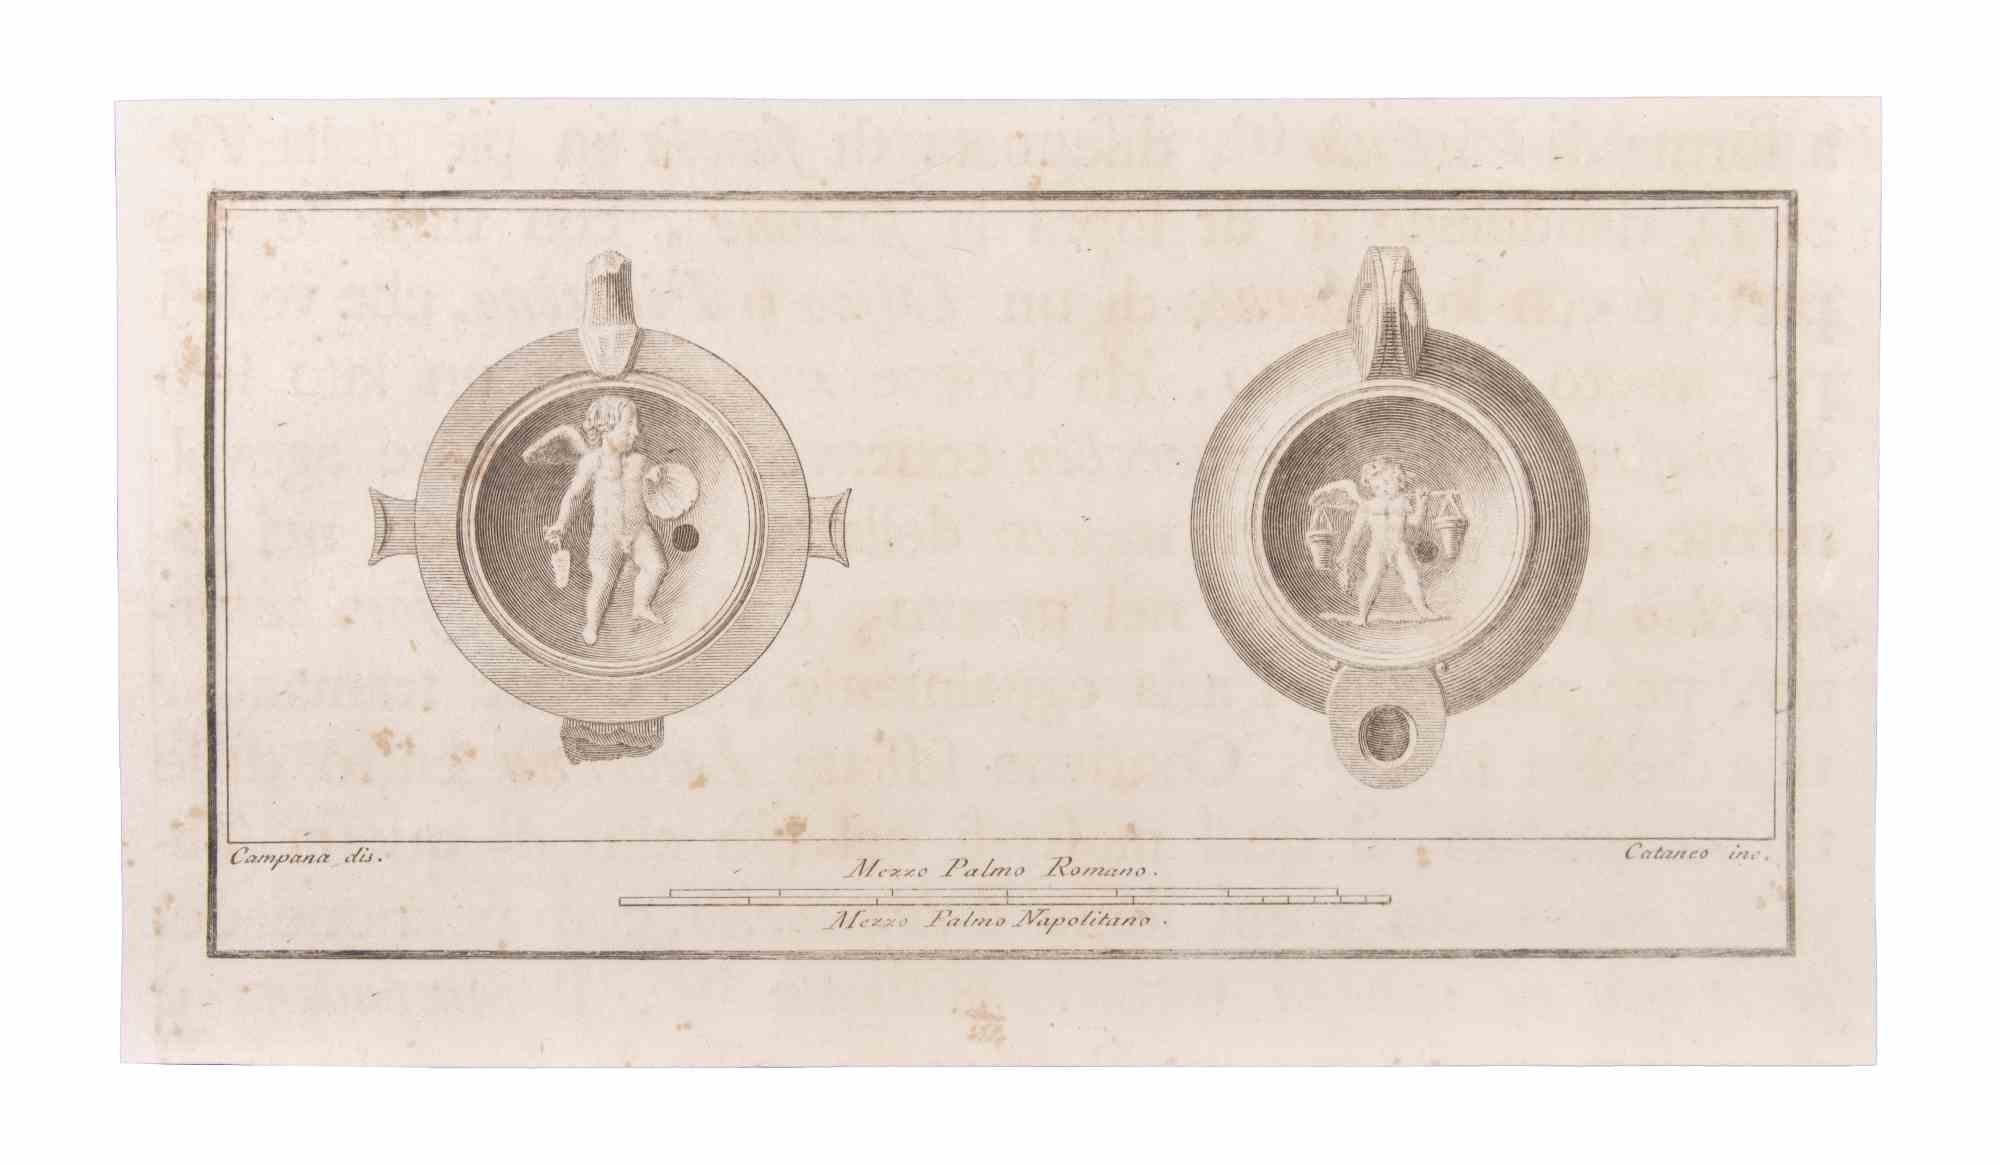 Oil Lamp With Decoration is an Etching realized by Aniello Cataneo (1732-1805).

The etching belongs to the print suite “Antiquities of Herculaneum Exposed” (original title: “Le Antichità di Ercolano Esposte”), an eight-volume volume of engravings